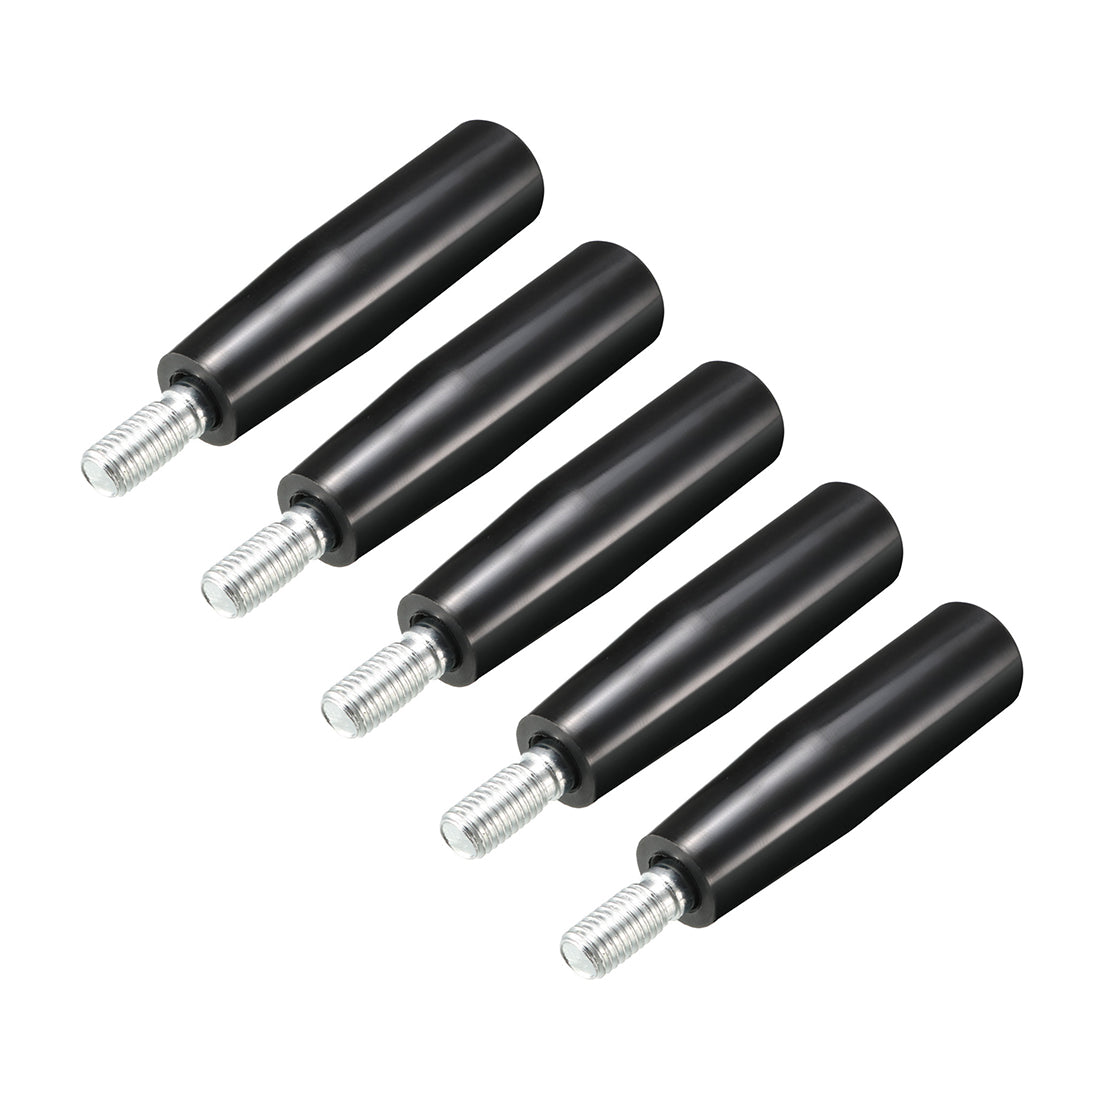 uxcell Uxcell 5Pcs Revolving Handwheel Machine Handle M12 Male Threaded Stem for Milling Machinery